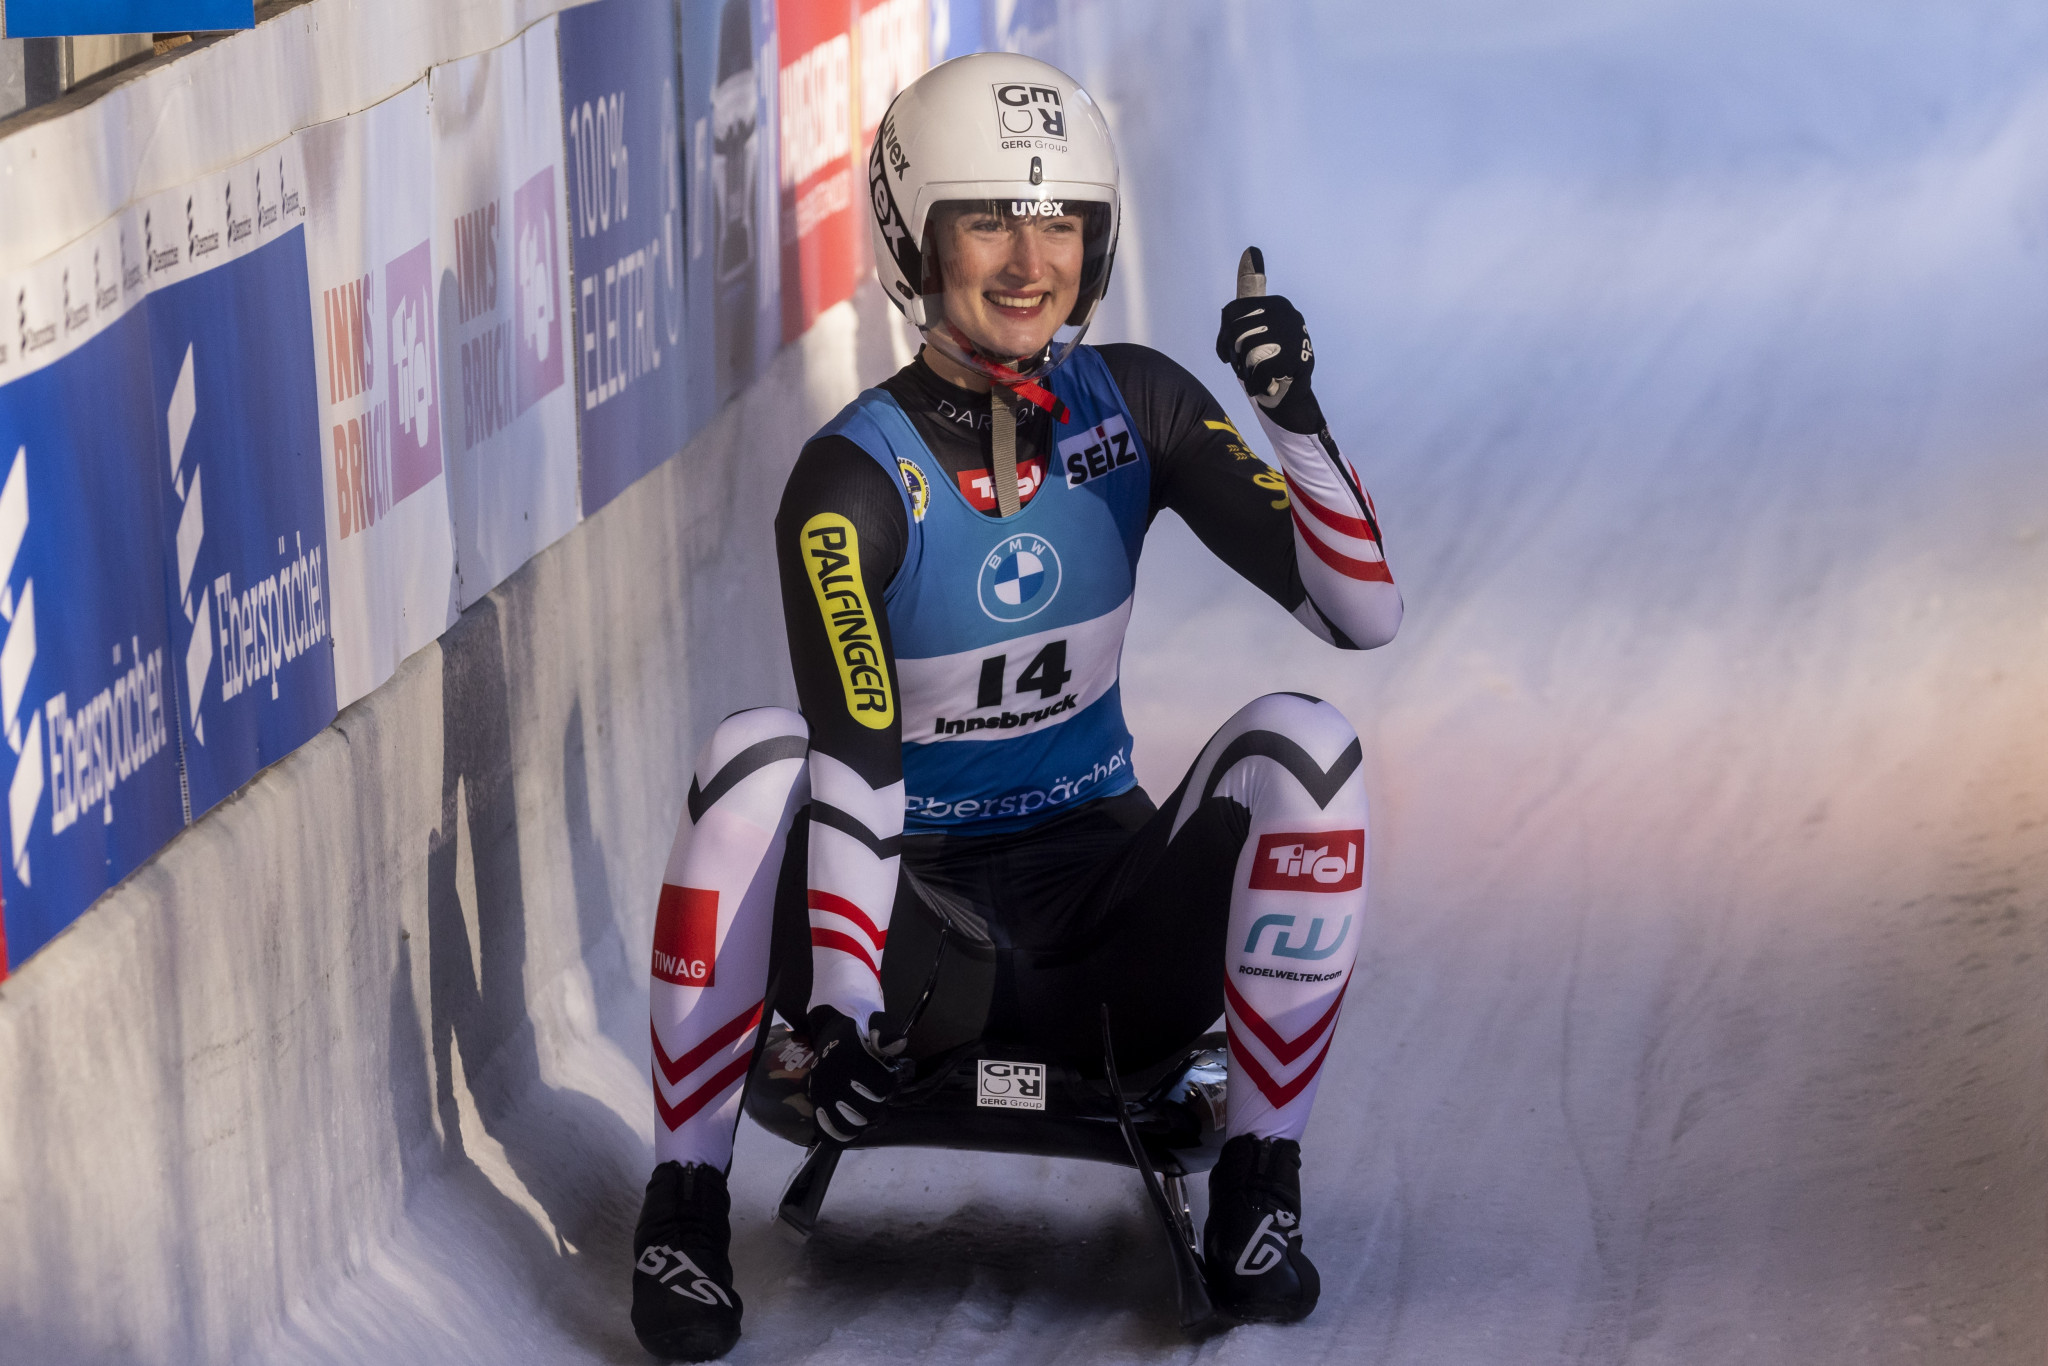 Egle wins fifth Luge World Cup race of season to increase pressure on Taubitz